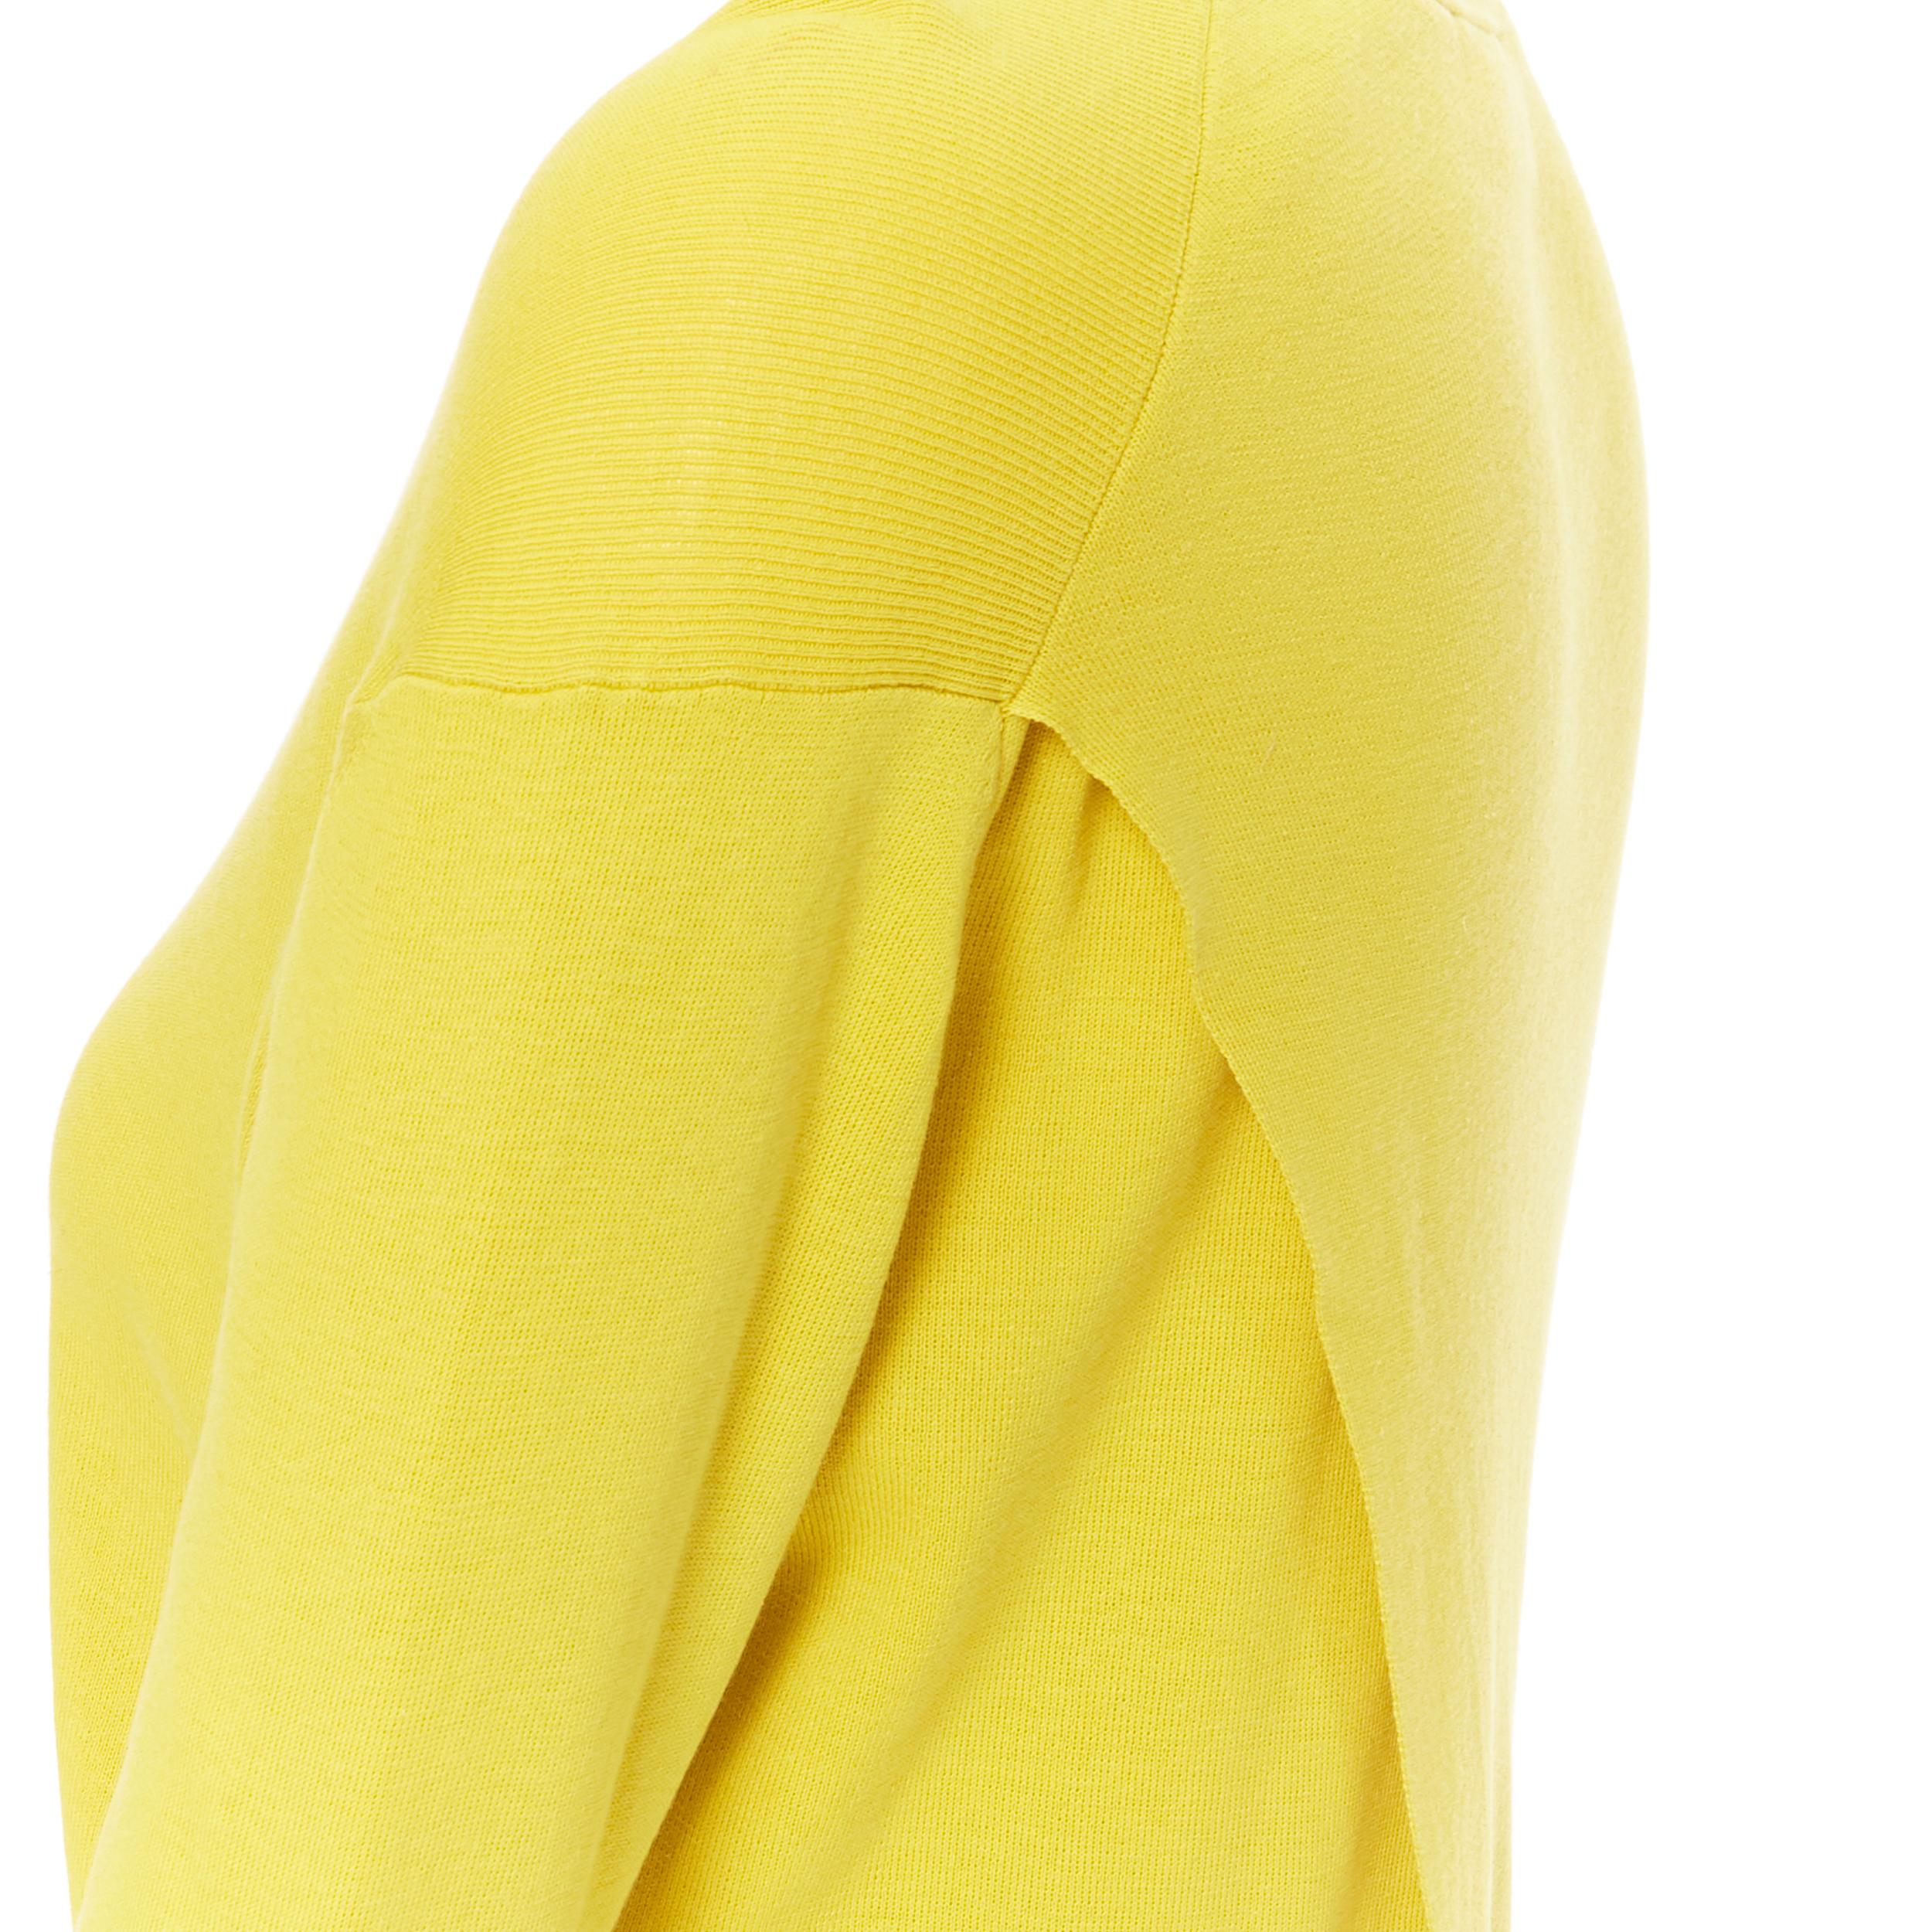 ACNE STUDIOS Materia SS15 100% cotton split back sweater top S 
Reference: JETI/A00179 
Brand: Acne Studios 
Collection: Spring Summer 2015 
Material: Cotton 
Color: Yellow 
Pattern: Solid 
Made in: China 

CONDITION: 
Condition: Very good, this